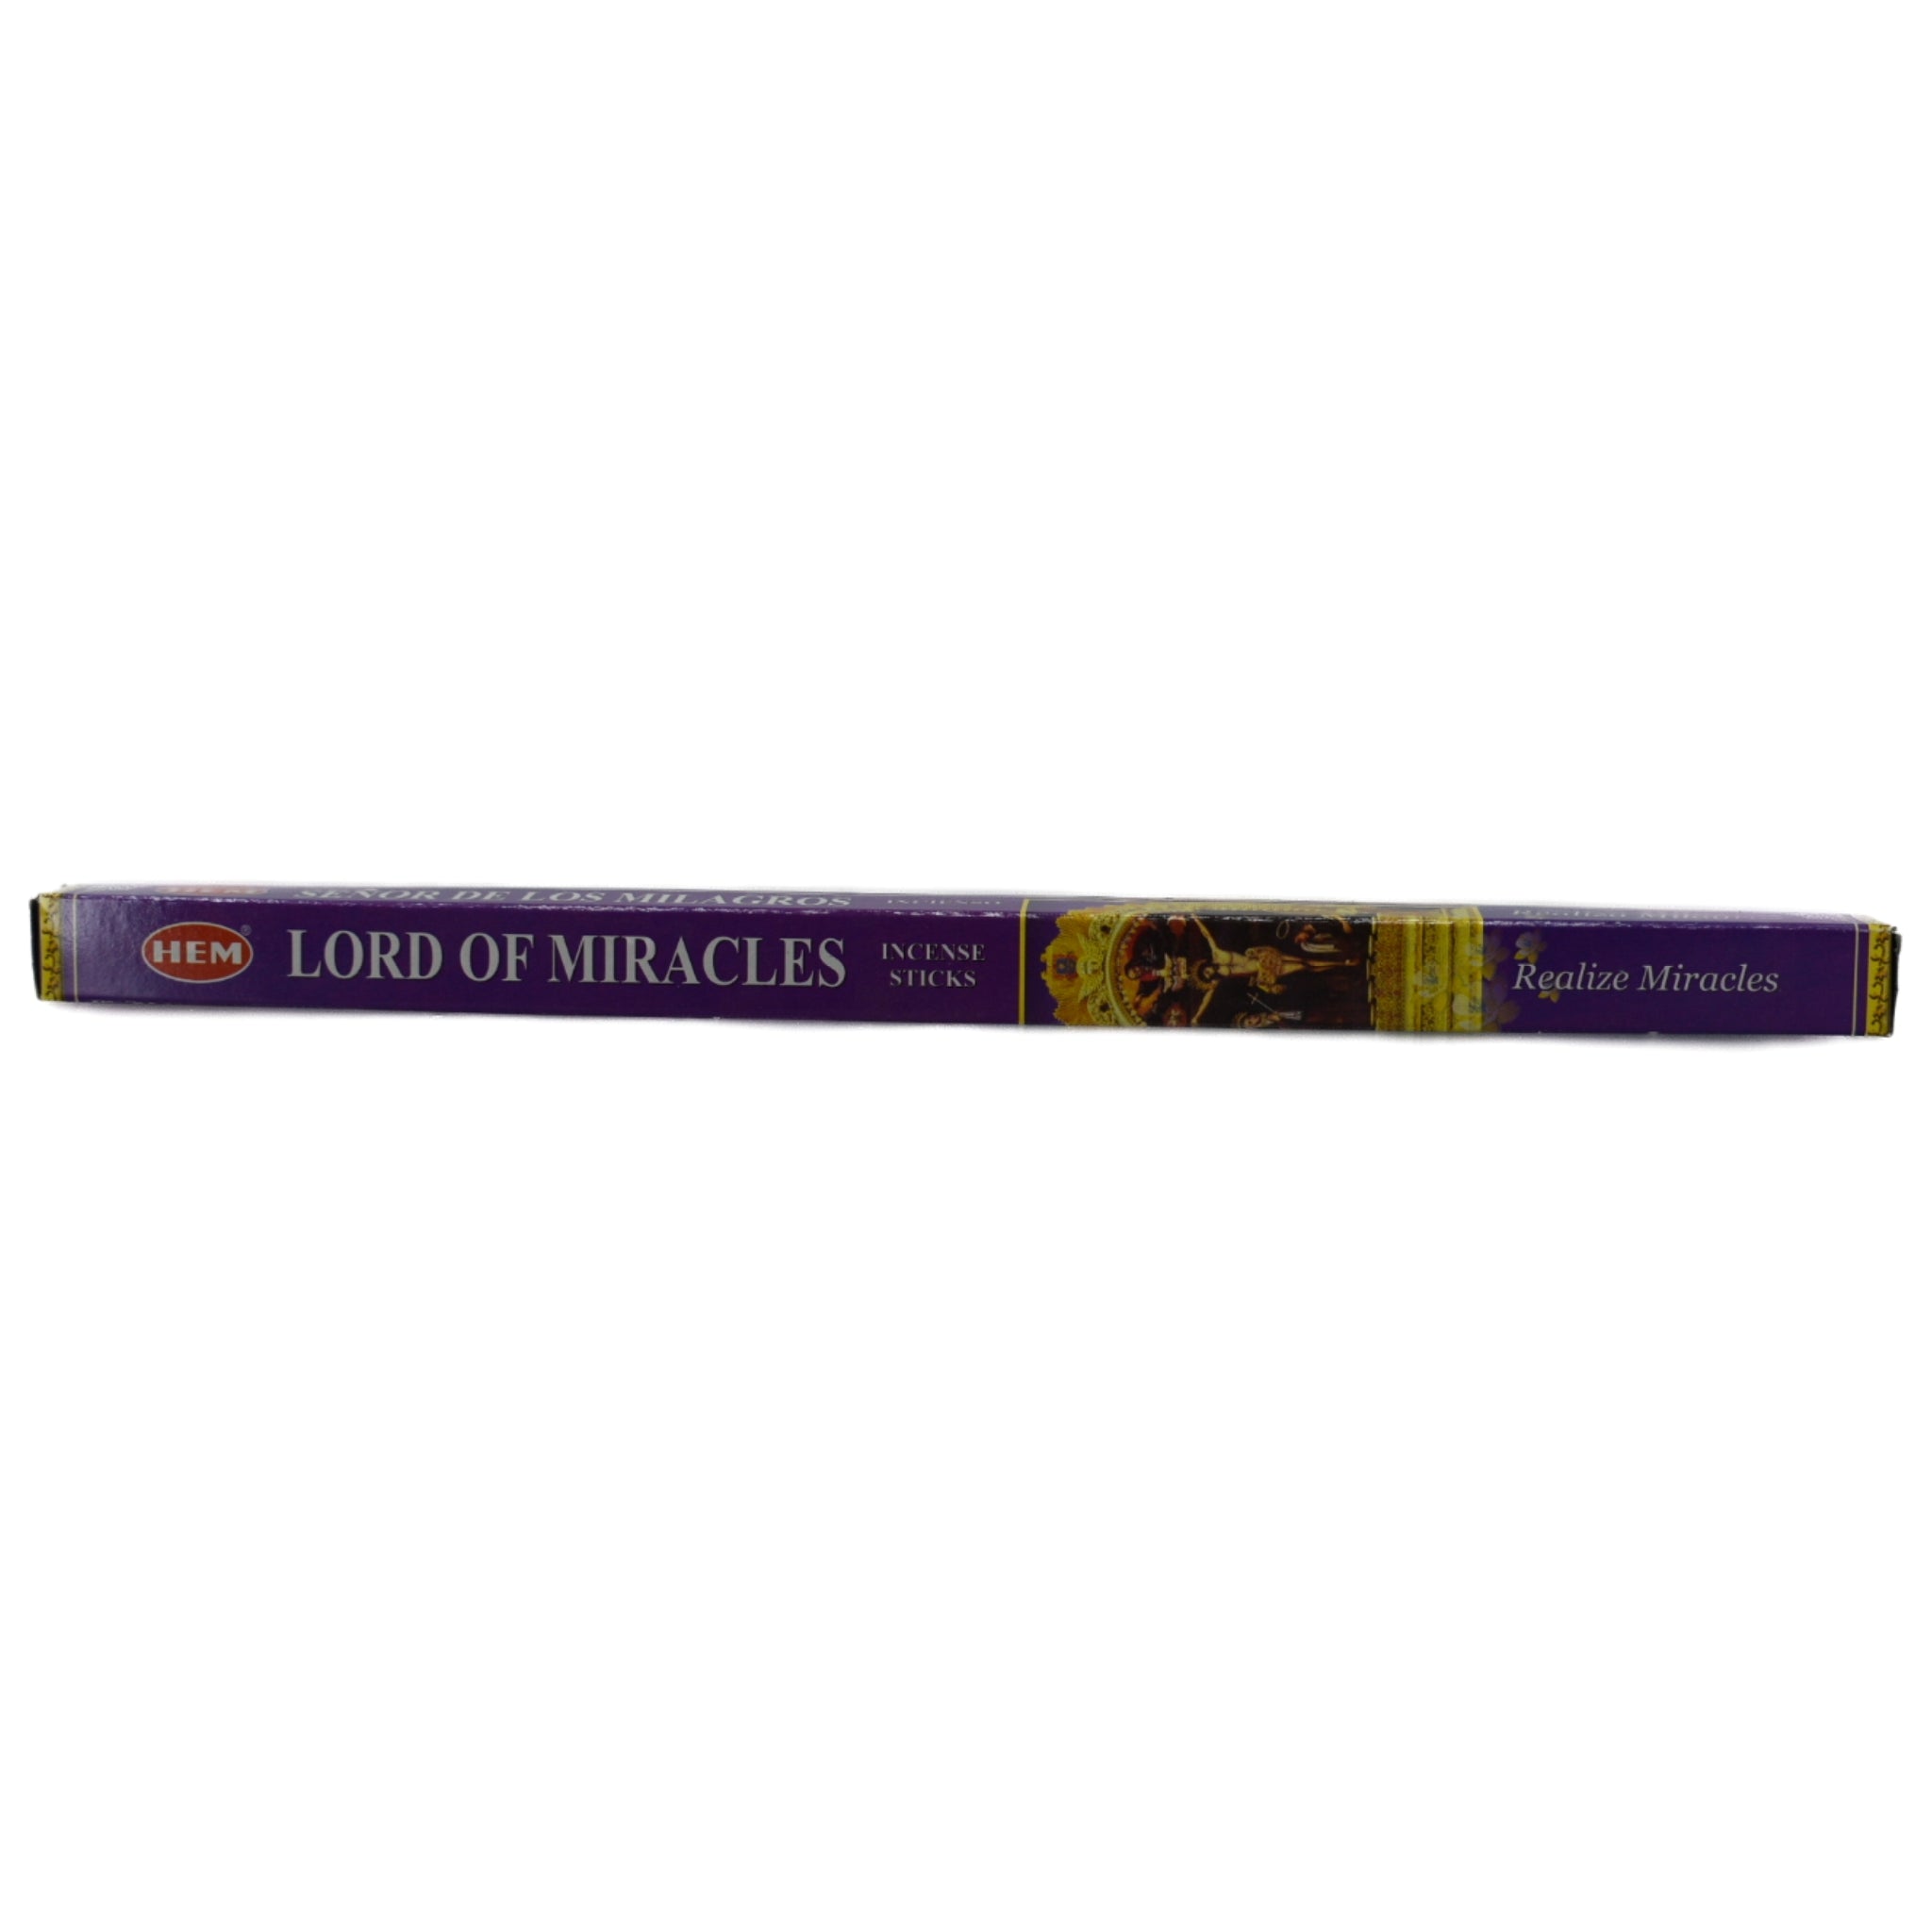 Lord of Miracles Incense Sticks